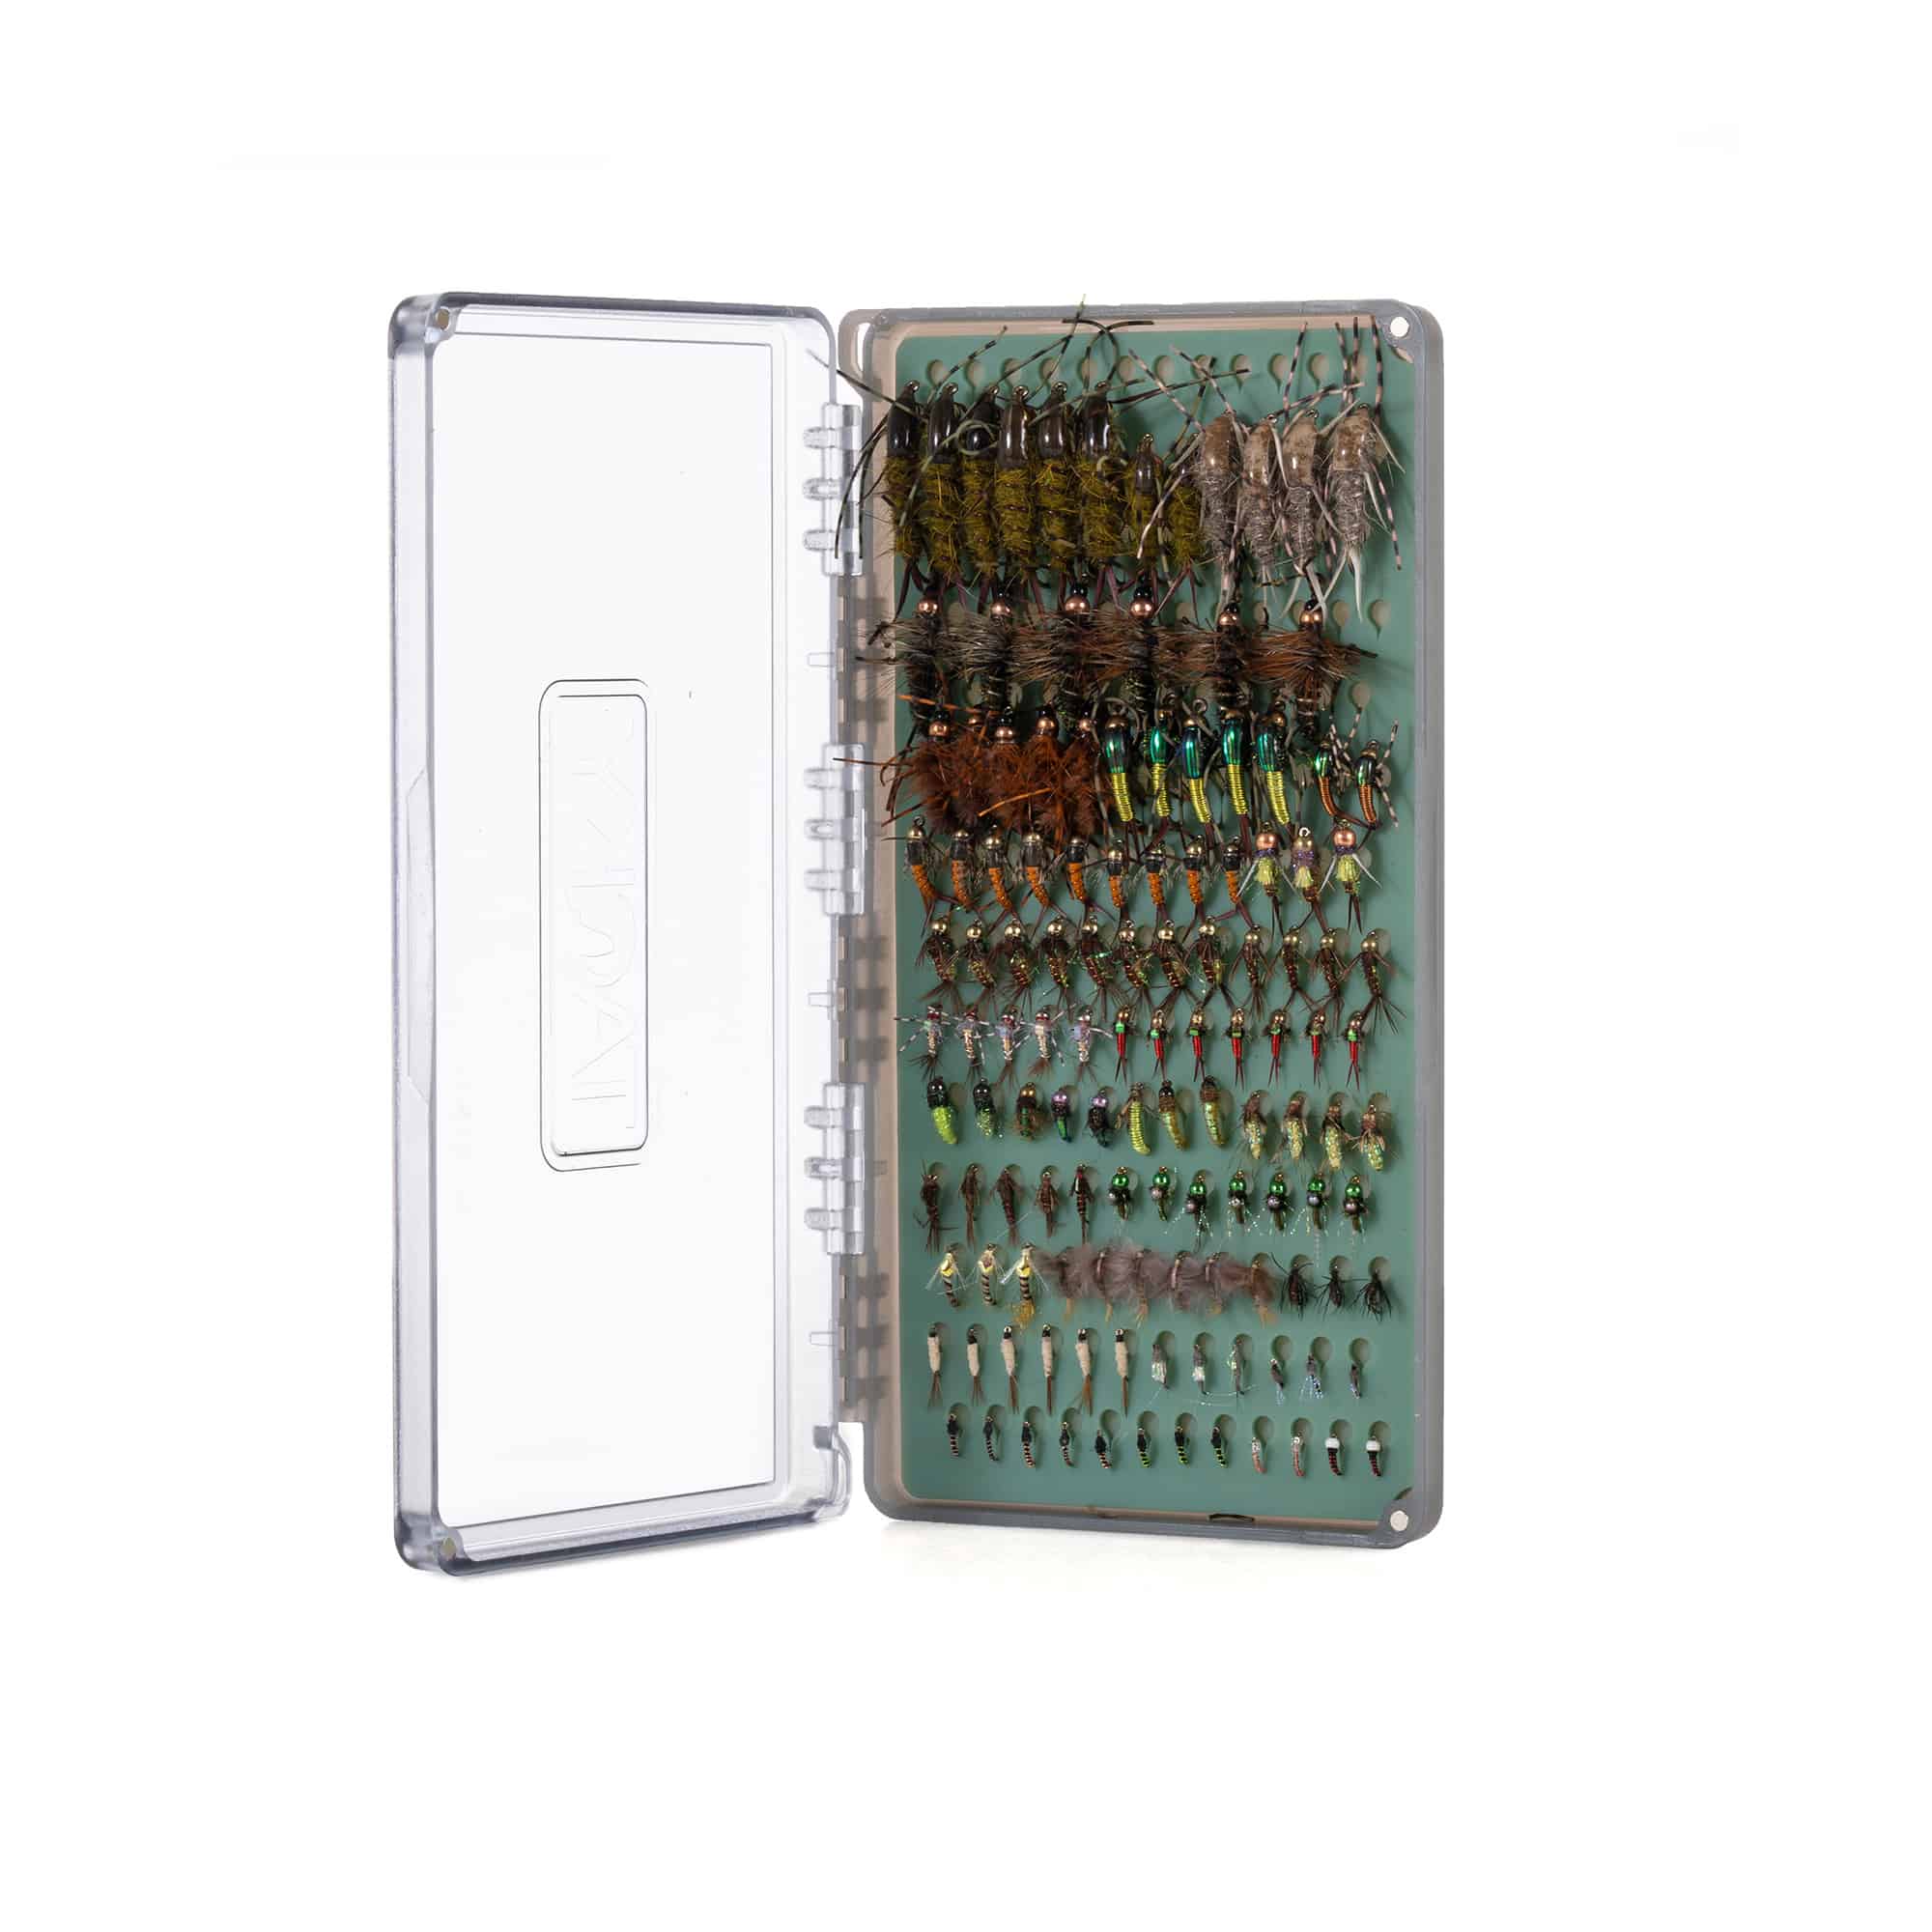 Tacky Original Fly Box Open Loaded With Flies